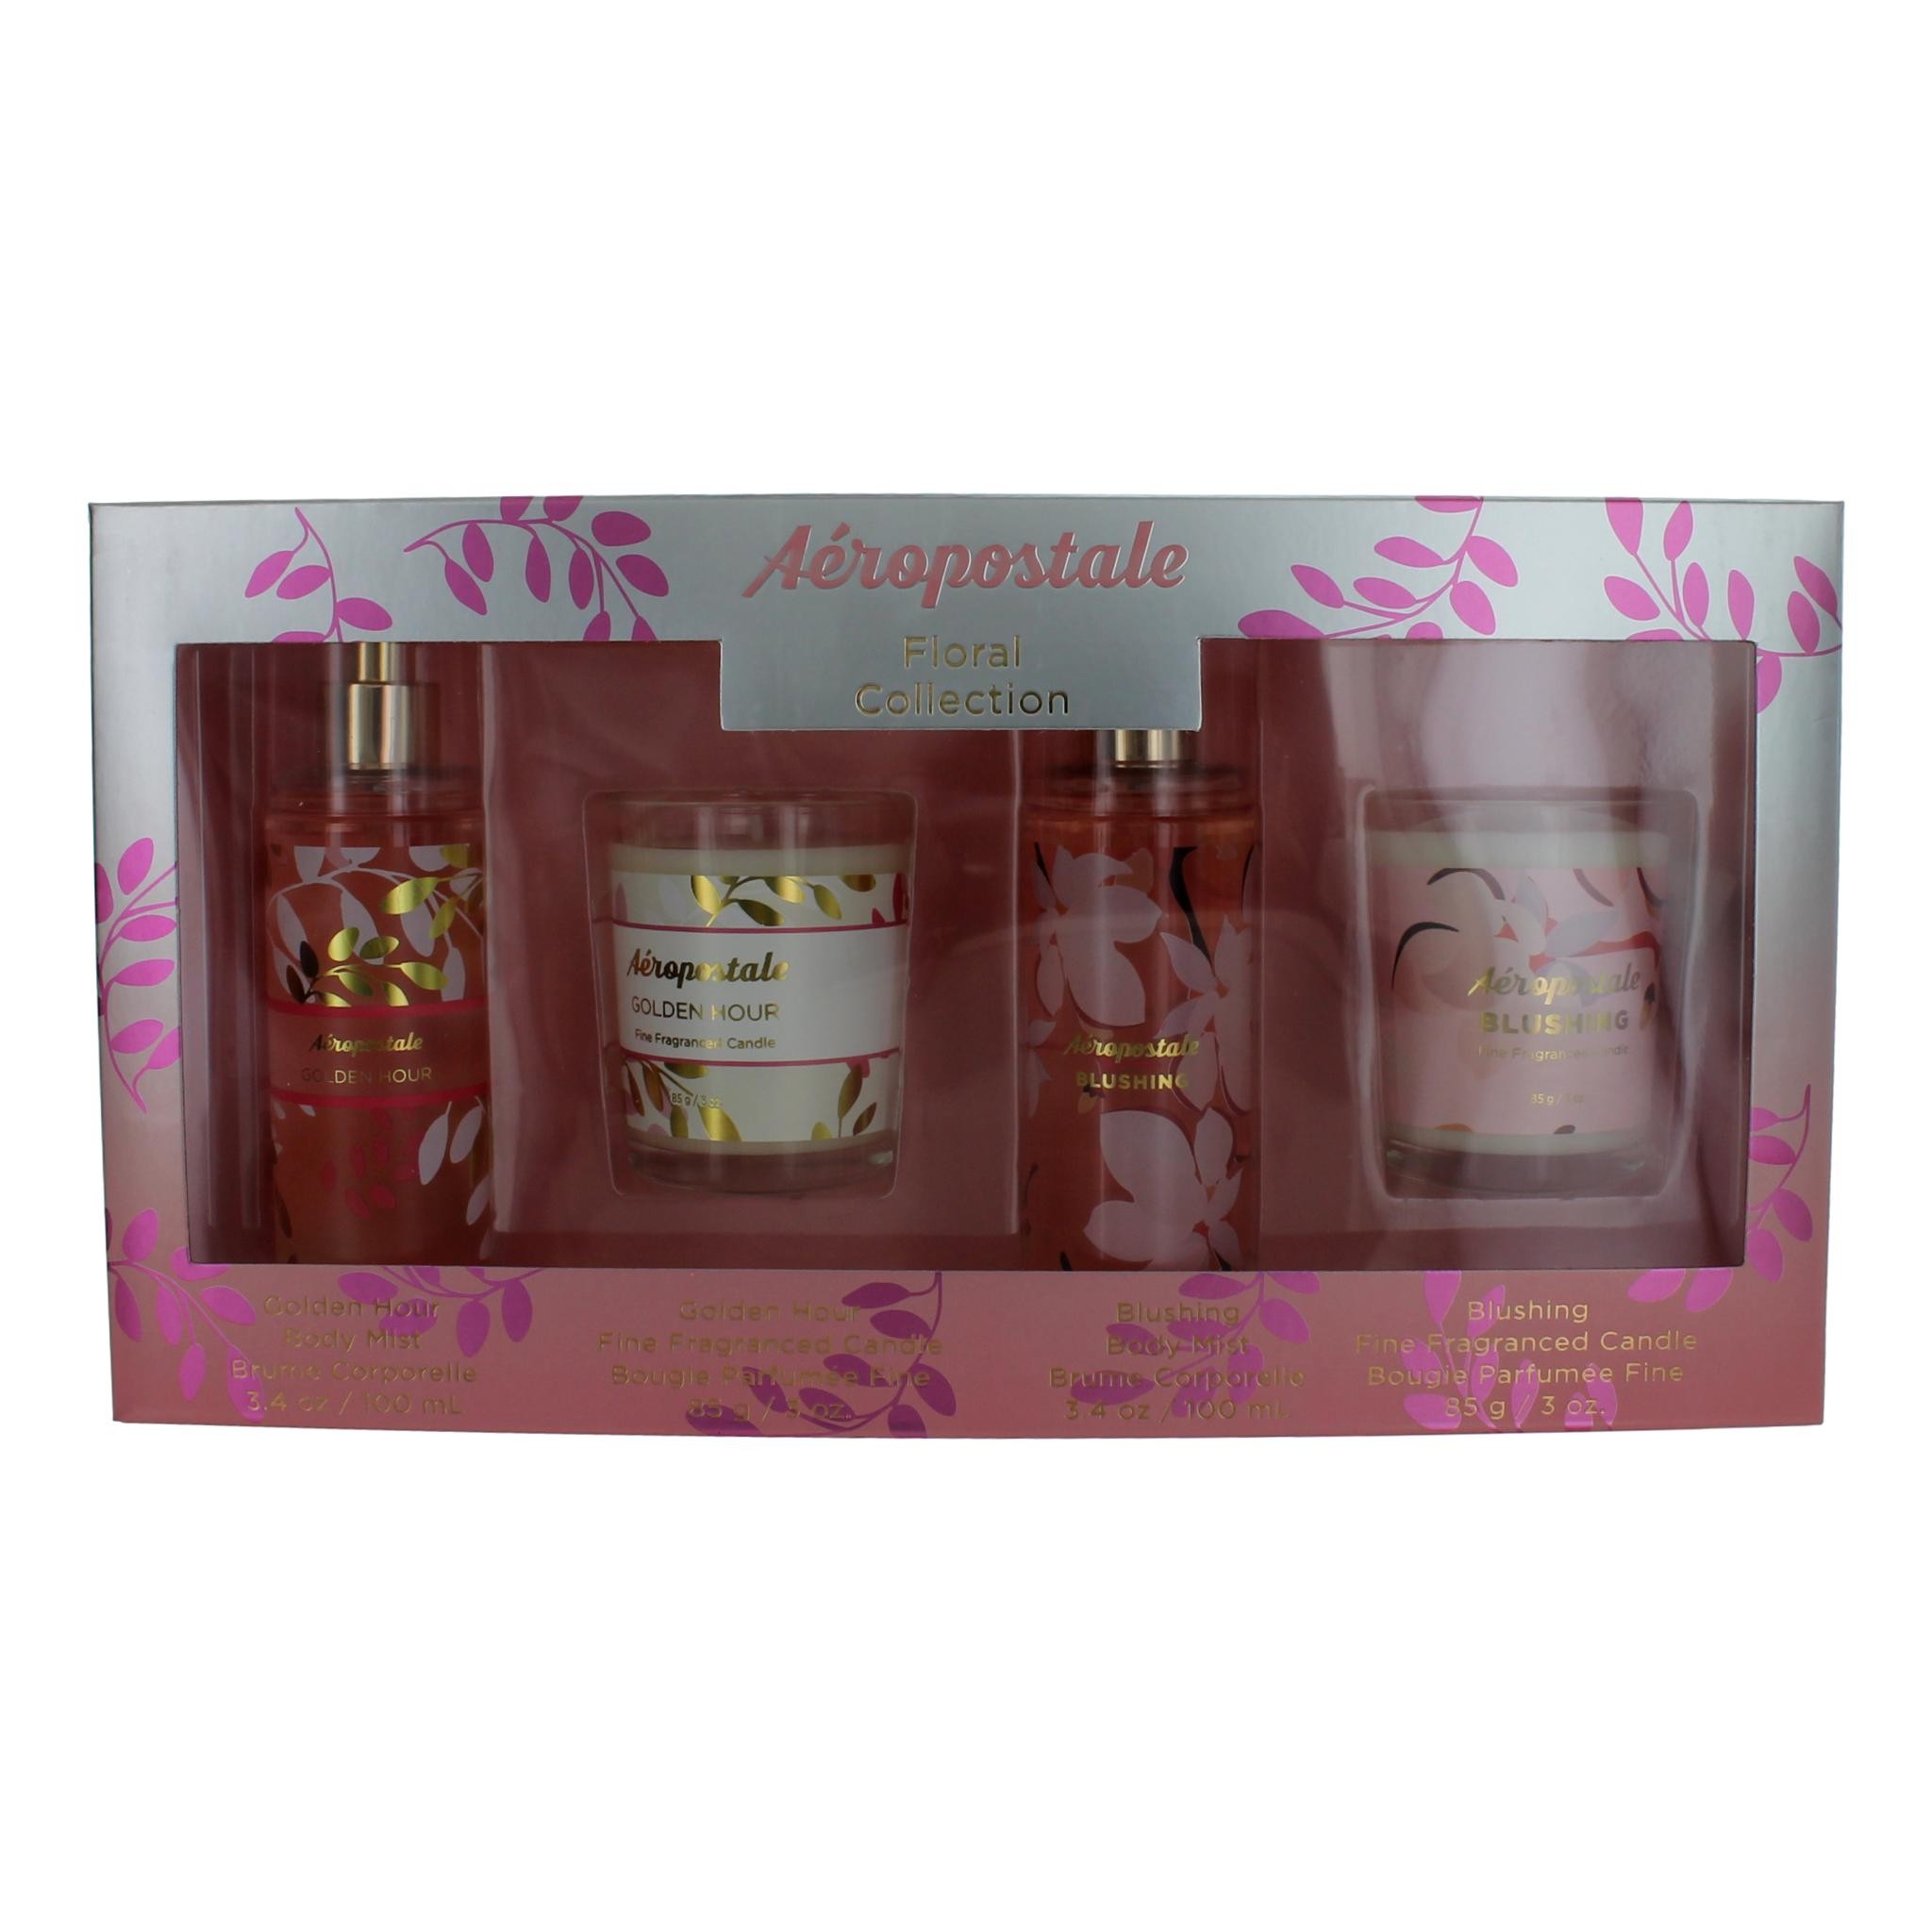 Aeropostale Floral Collection by Aeropostale 4 Piece Gift Set